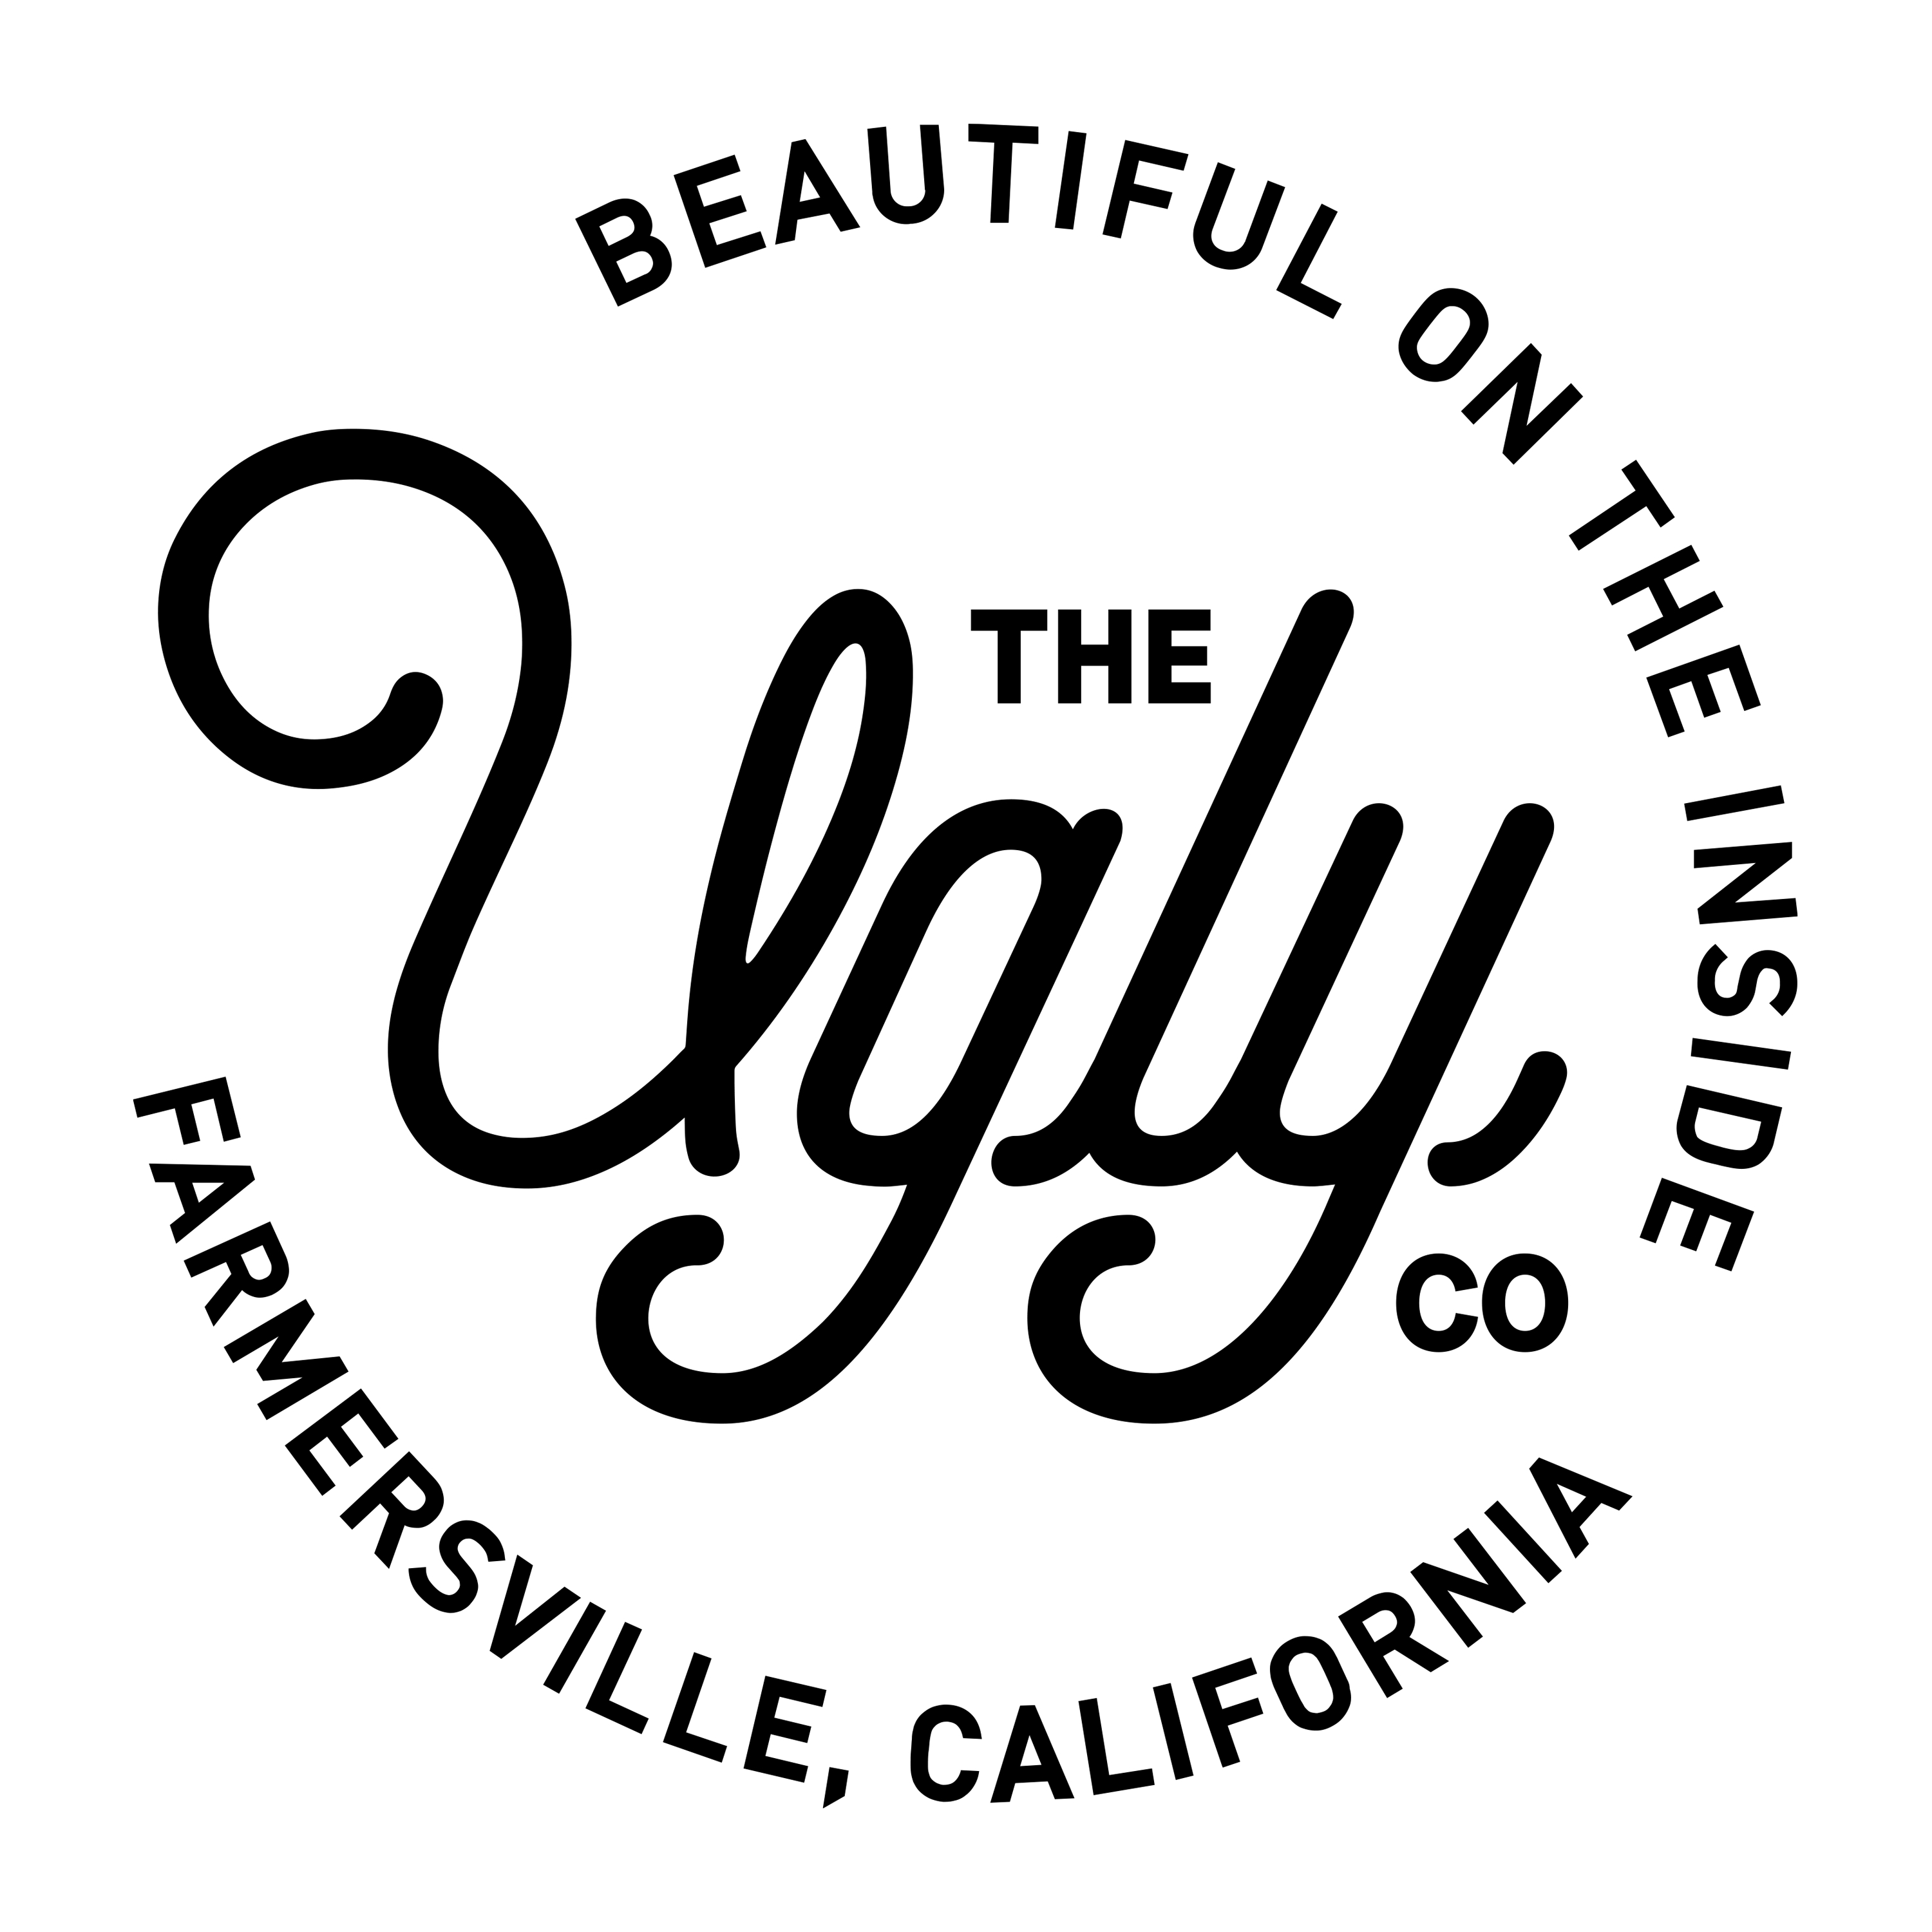 The Ugly Co.